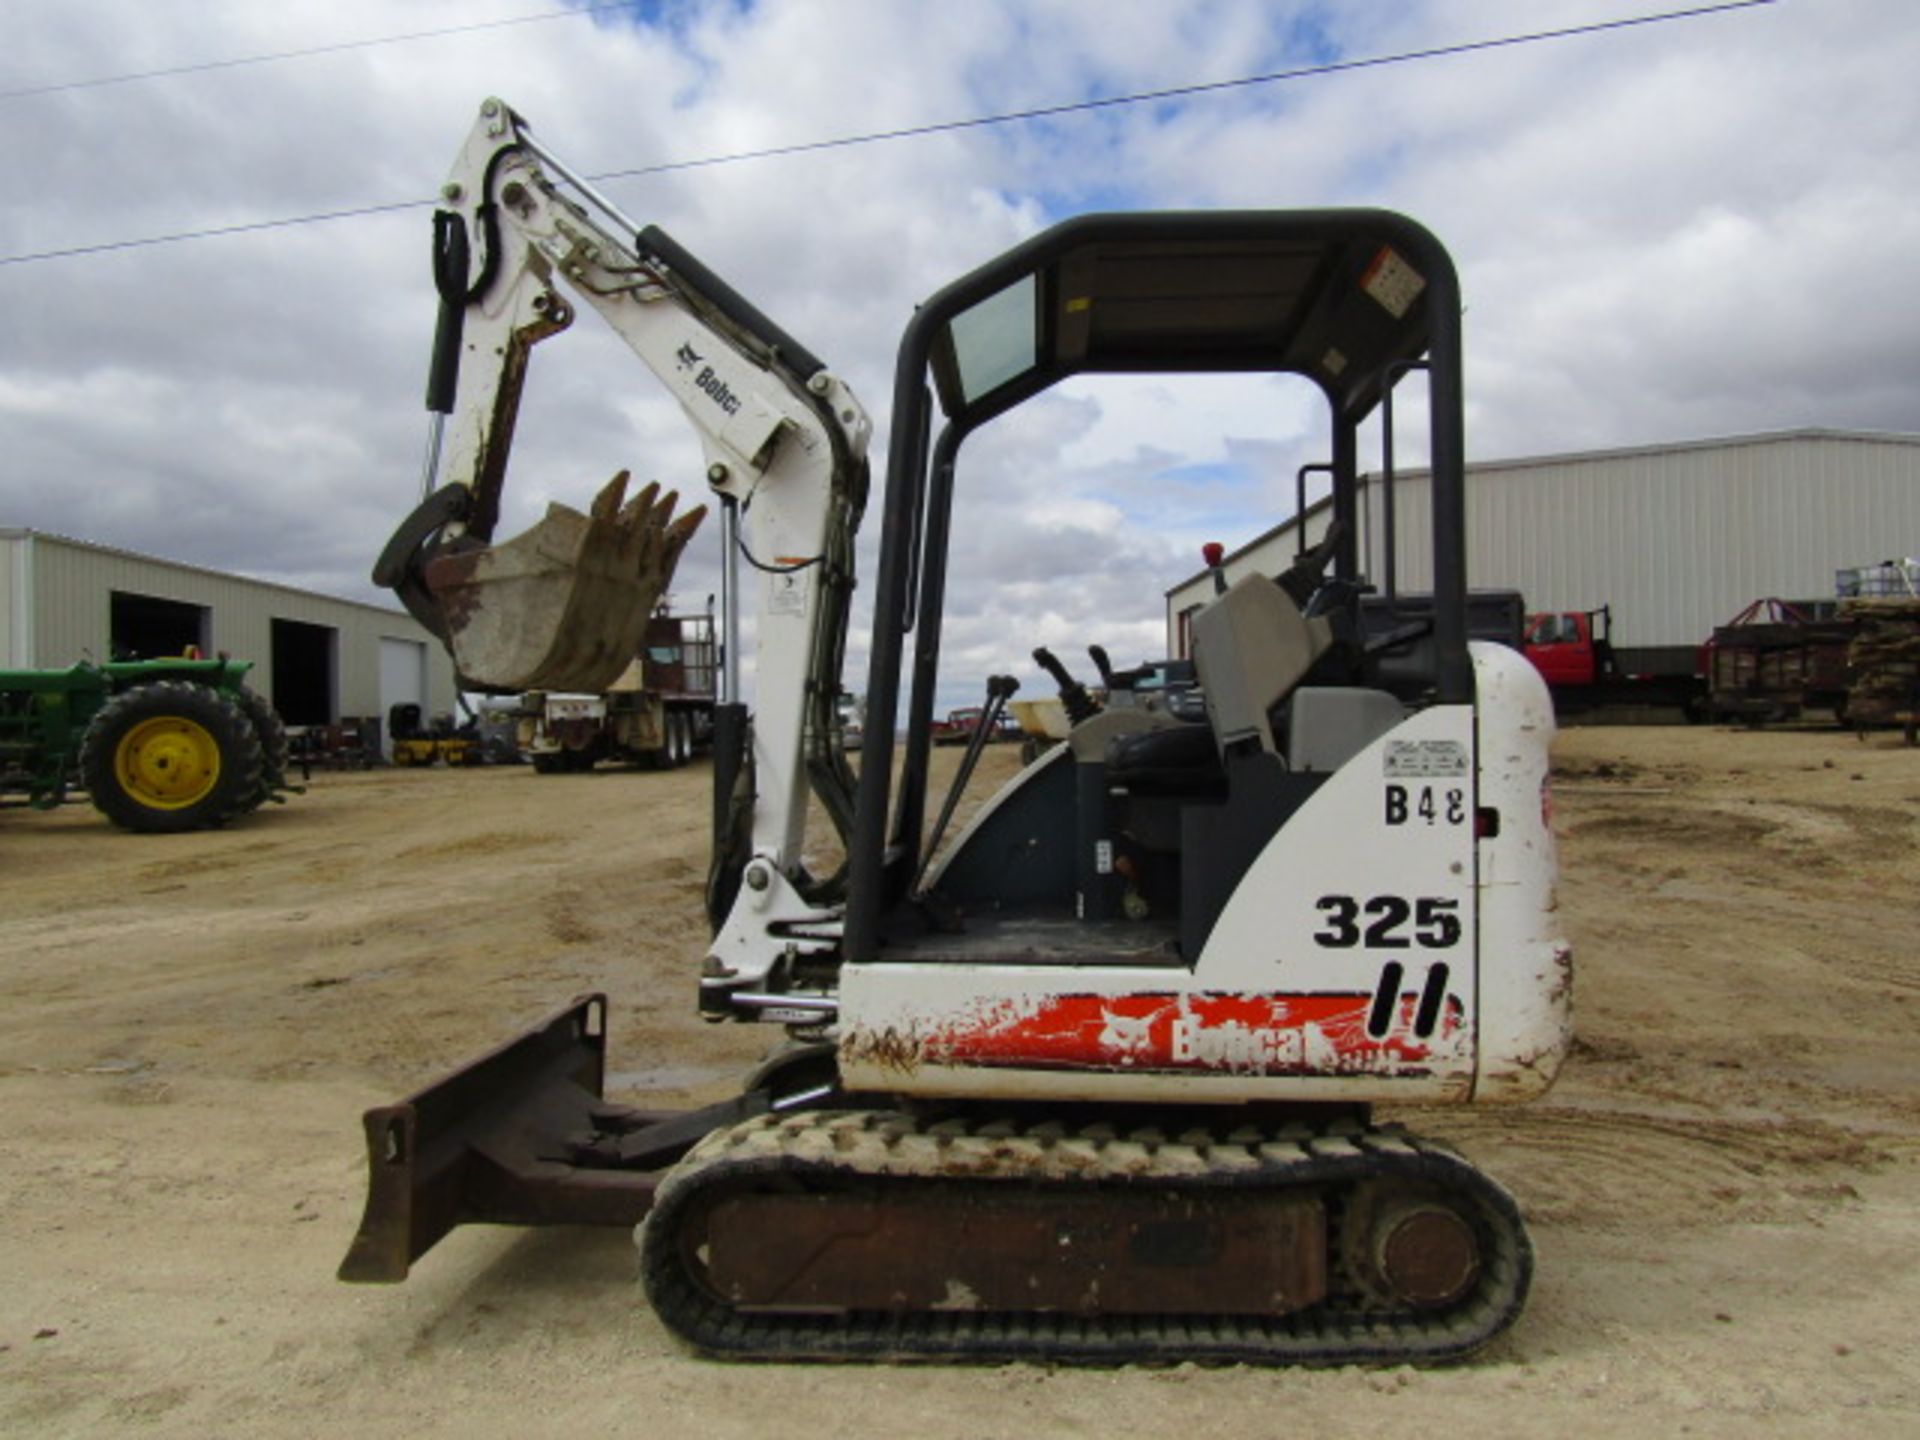 2006 Bobcat 325G Mini Track Hoe, Serial # 234113667, 2327 hours, Located in Hopkinton, IA - Image 3 of 15